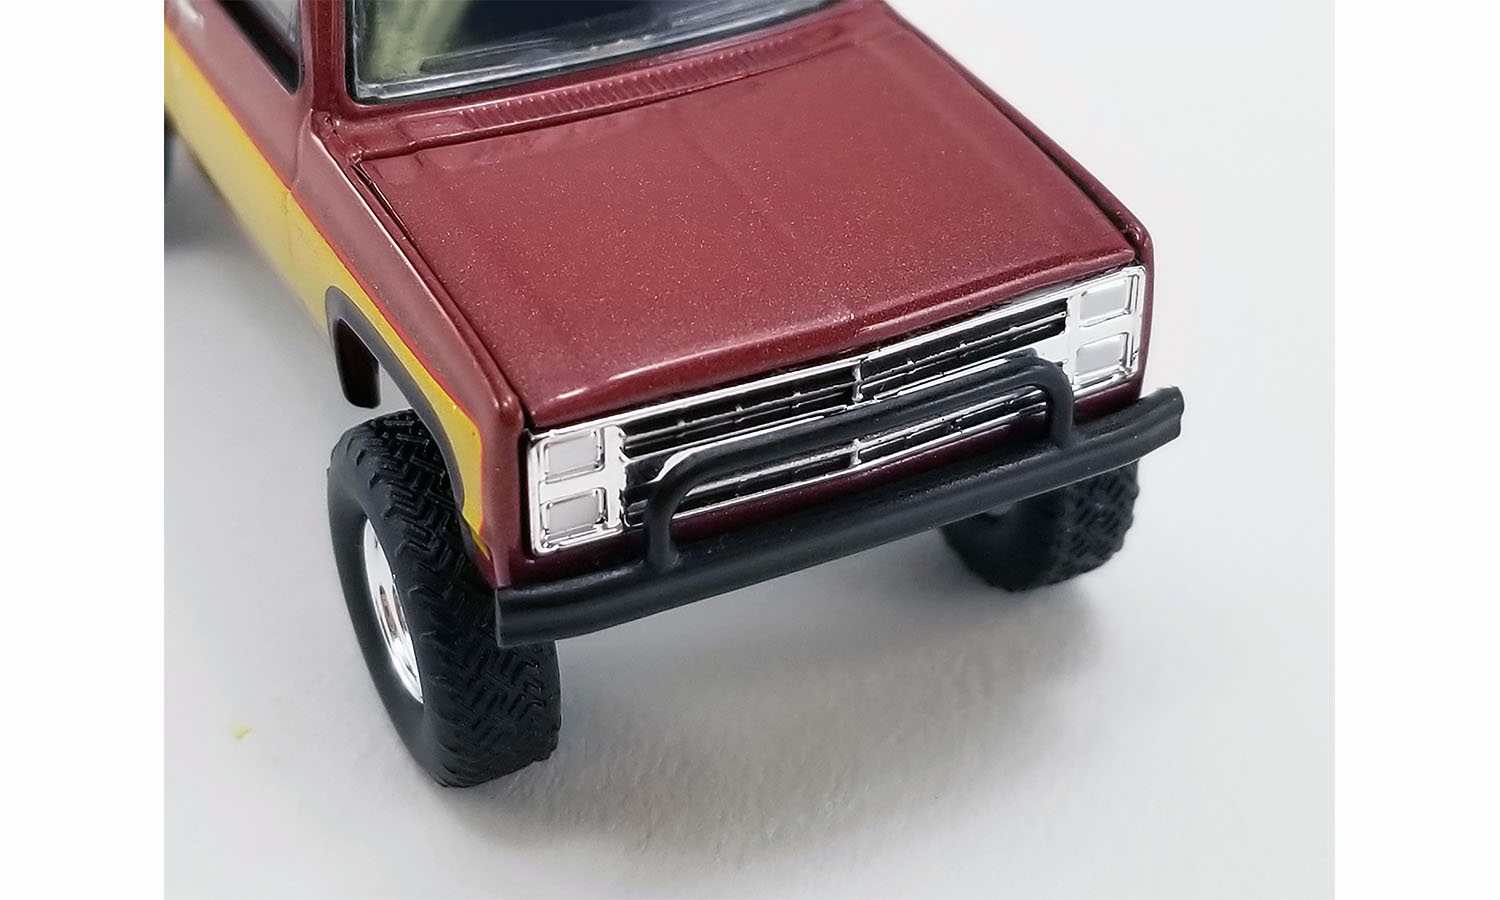 ACME 51369 1986 CHEVY K20 PICK UP STACEY DAVID'S GEARZ FALL GUY TRIBUTE 1/64 